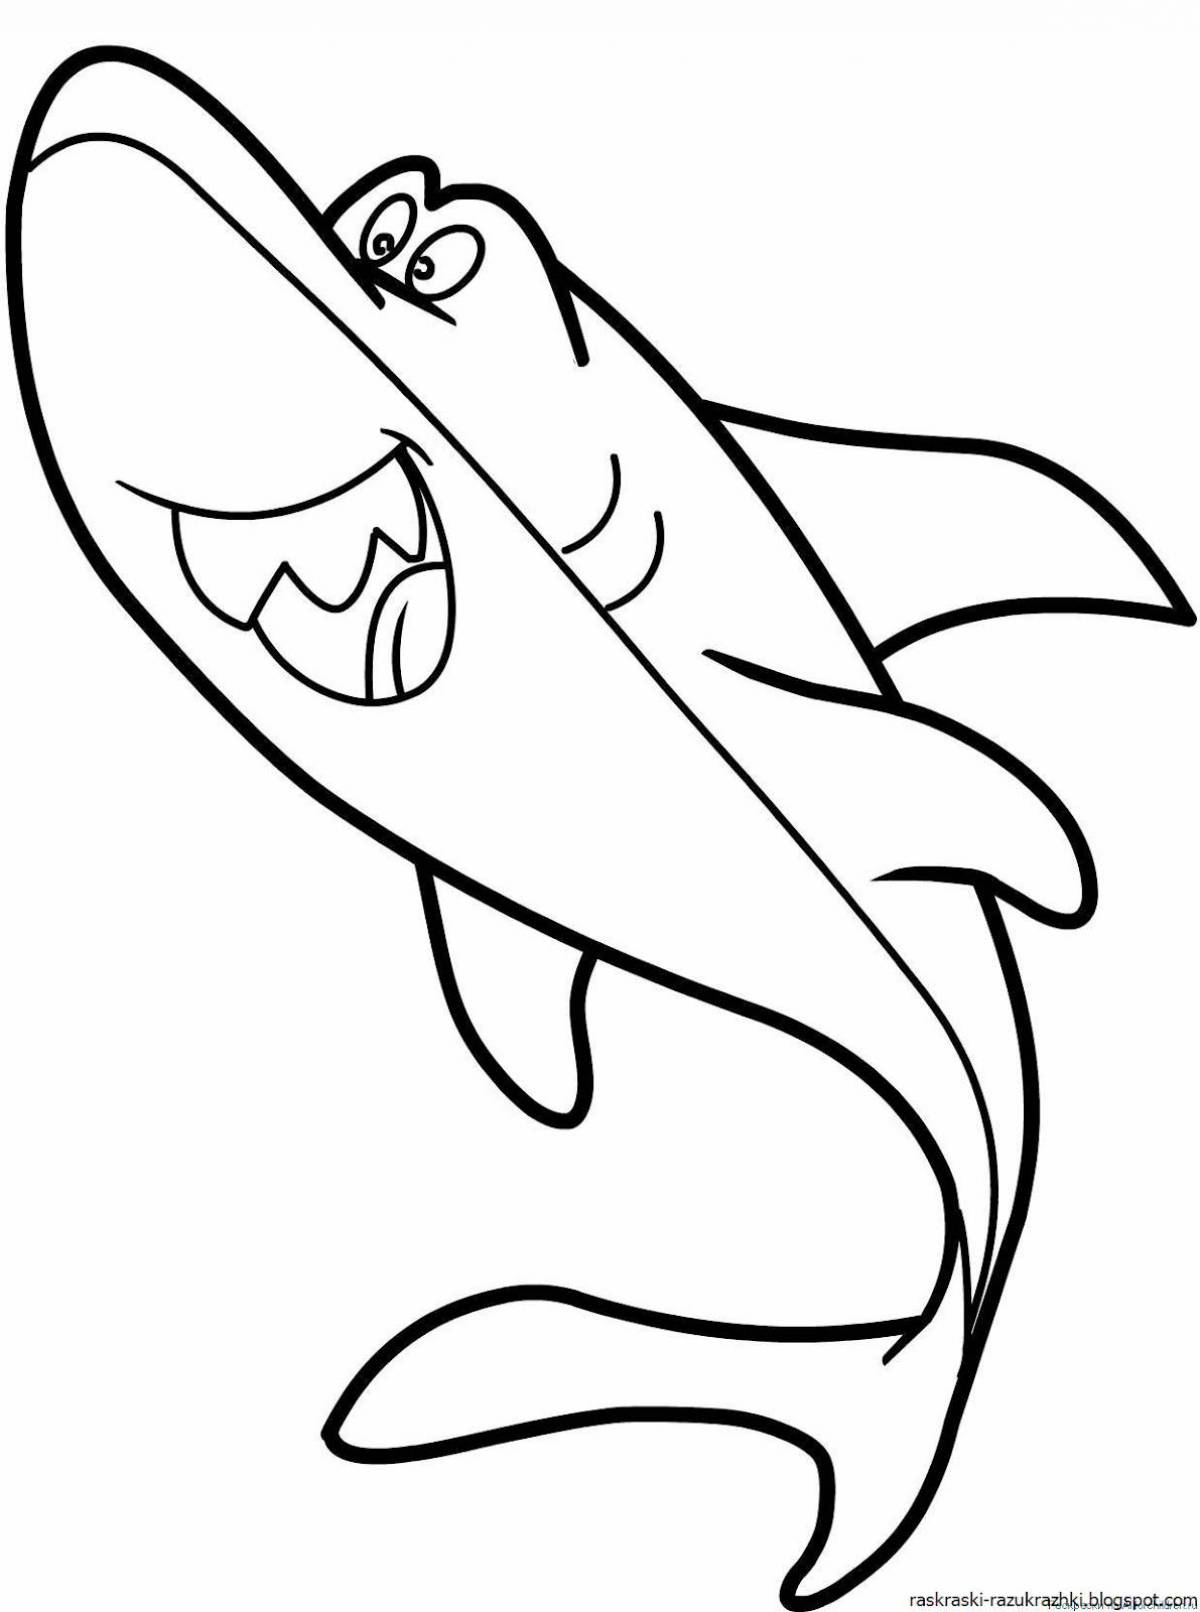 Gorgeous little shark coloring page